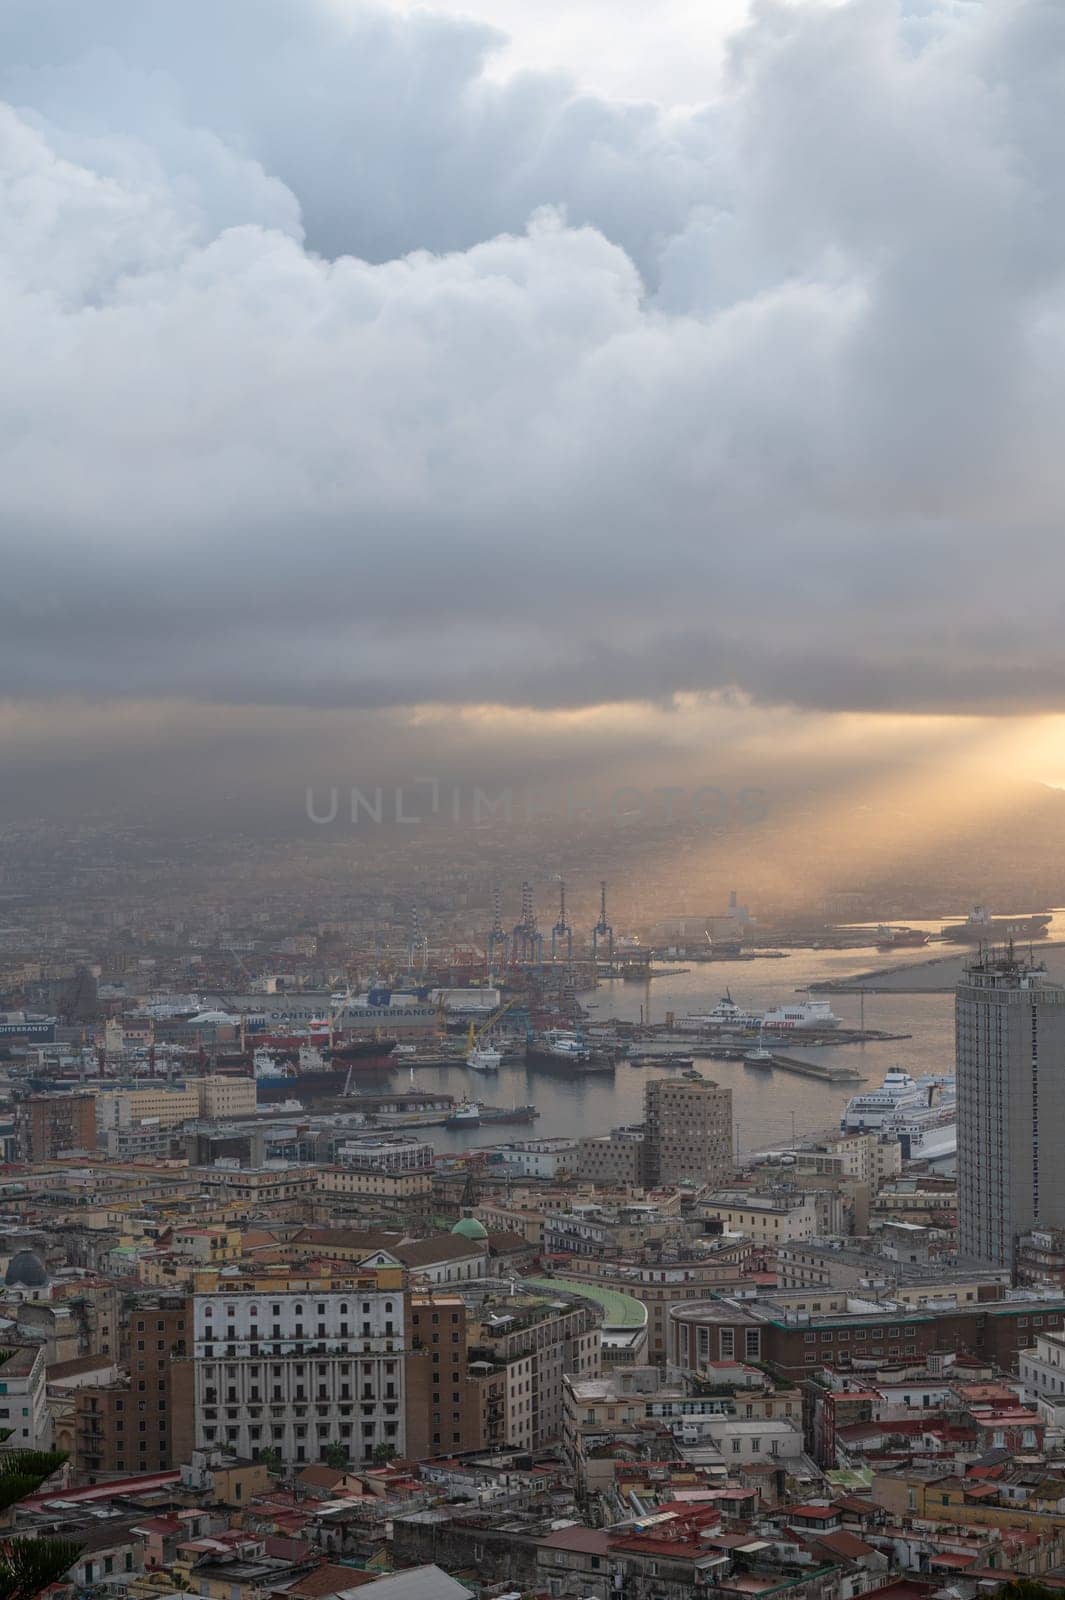 Panorama of the sea port of the city of Napoli in the morning with Vesuvius in the background.